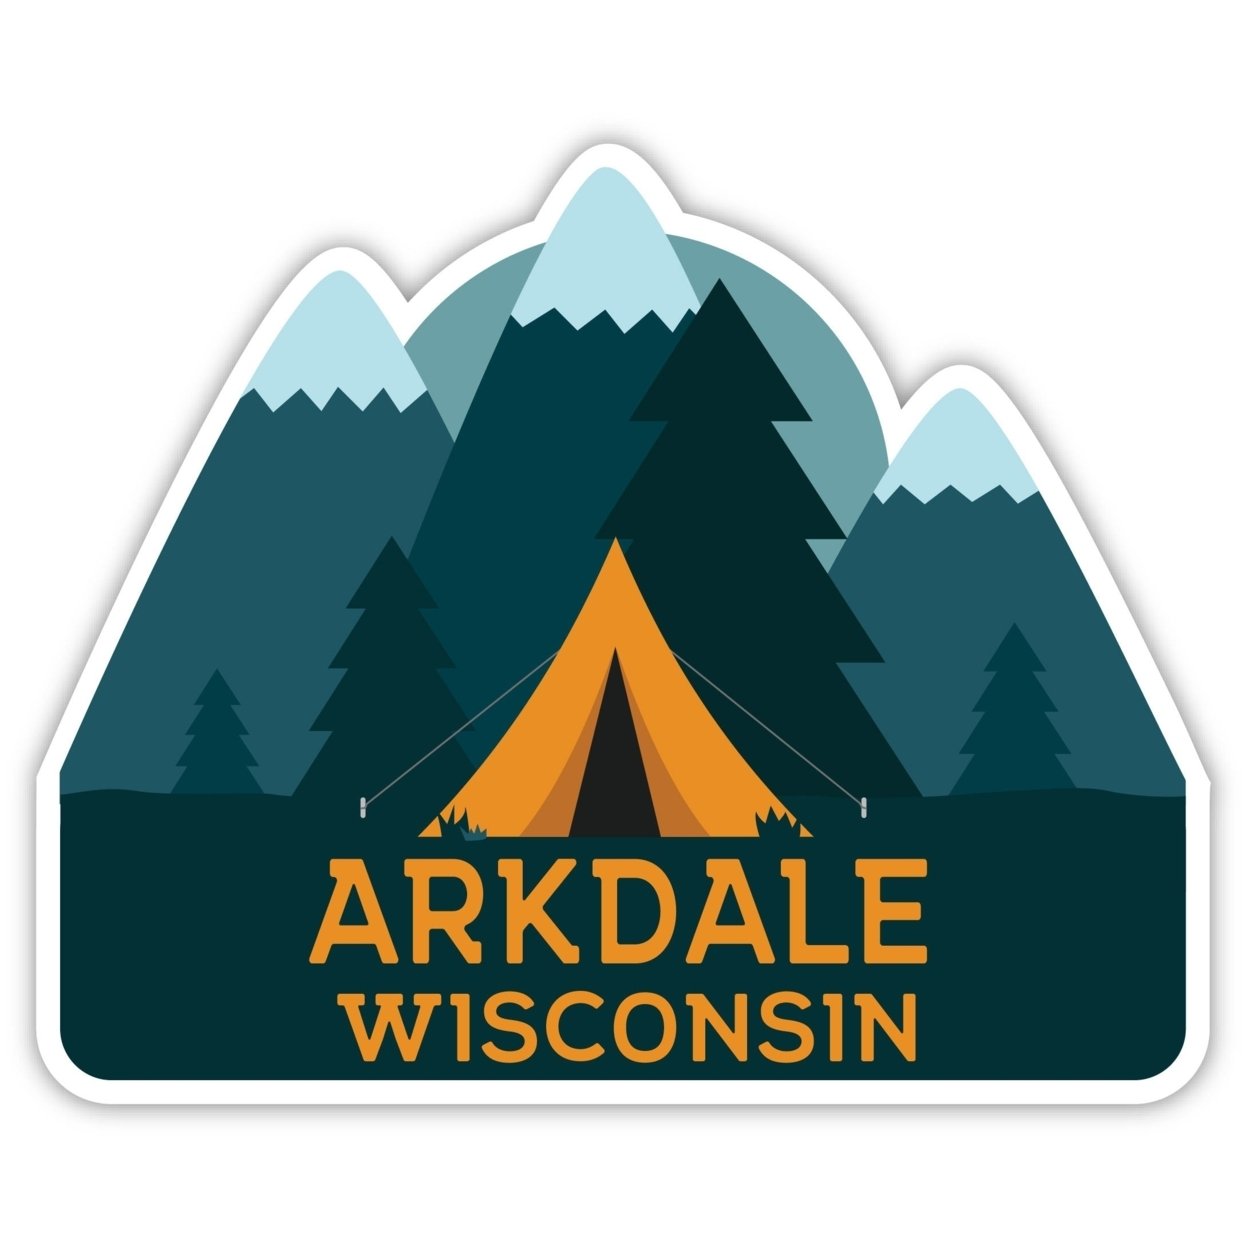 Arkdale Wisconsin Souvenir Decorative Stickers (Choose Theme And Size) - 4-Pack, 2-Inch, Tent